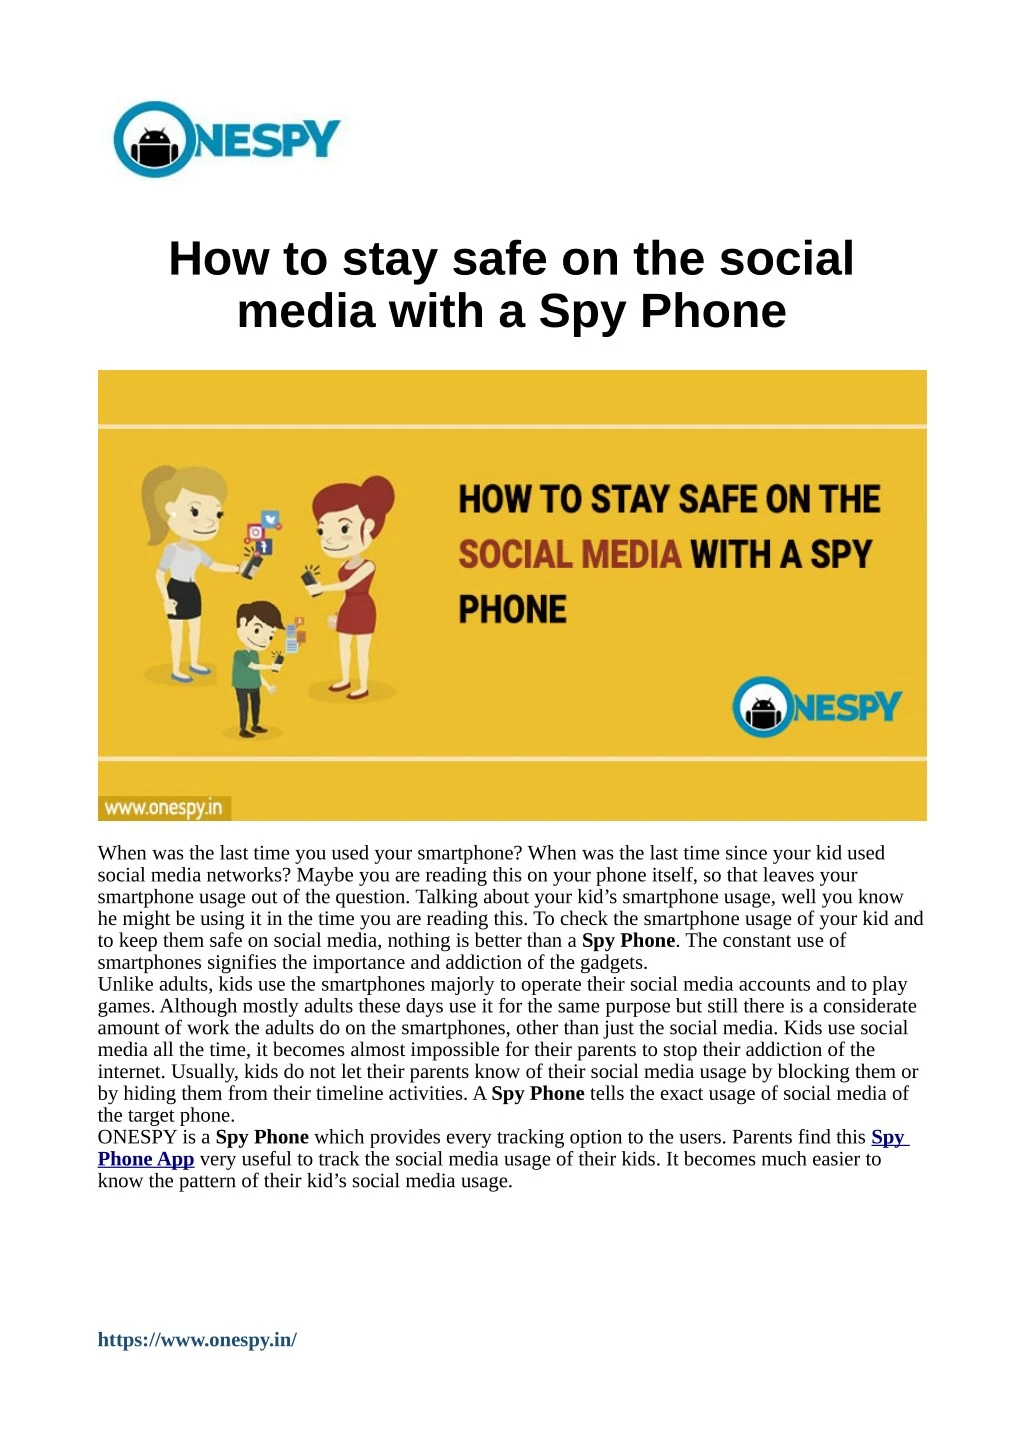 how to stay safe on the social media with